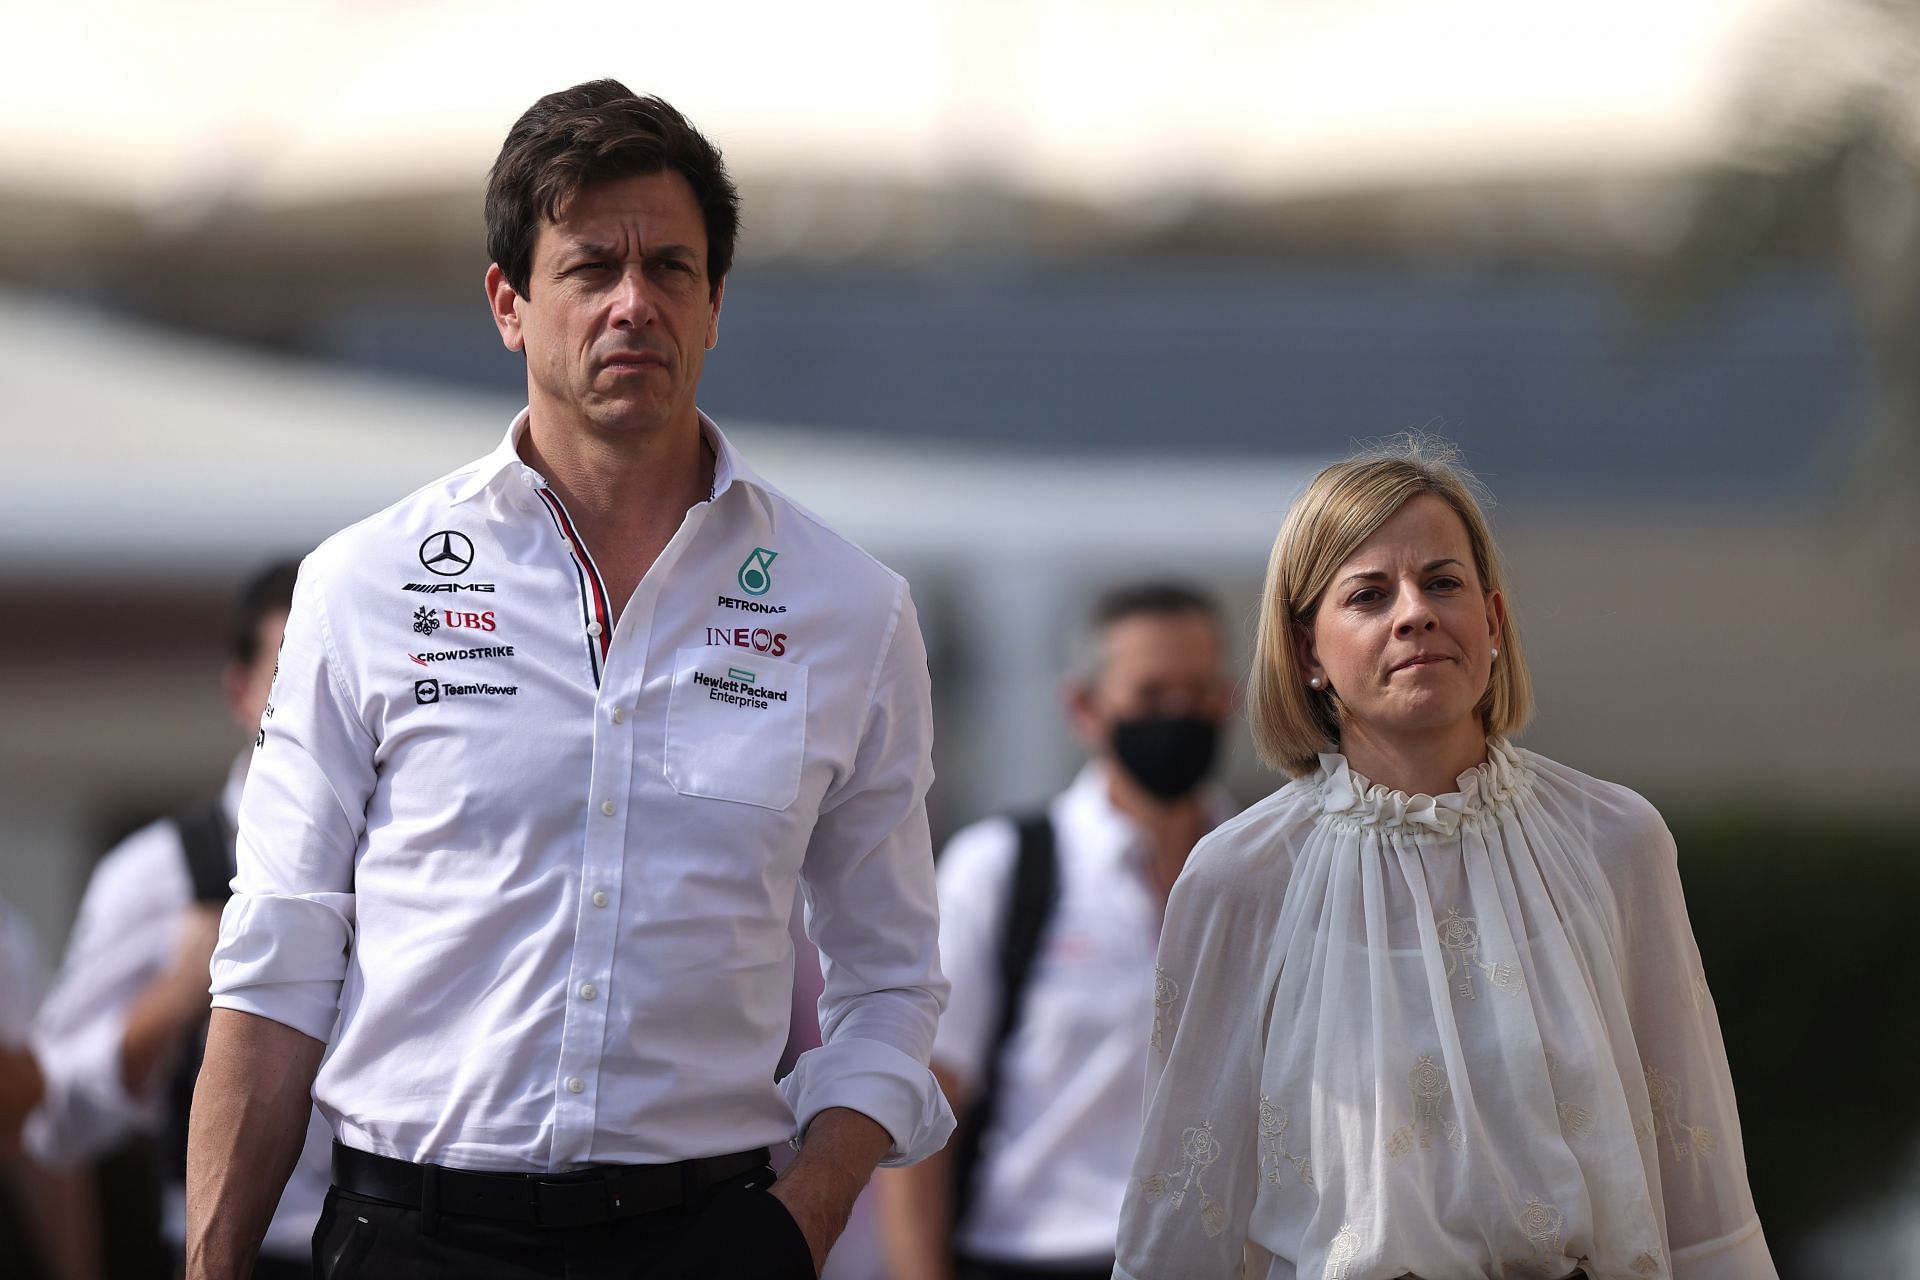 Toto Wolff (left) and Susie Wolff (right) (Photo by Lars Baron/Getty Images)